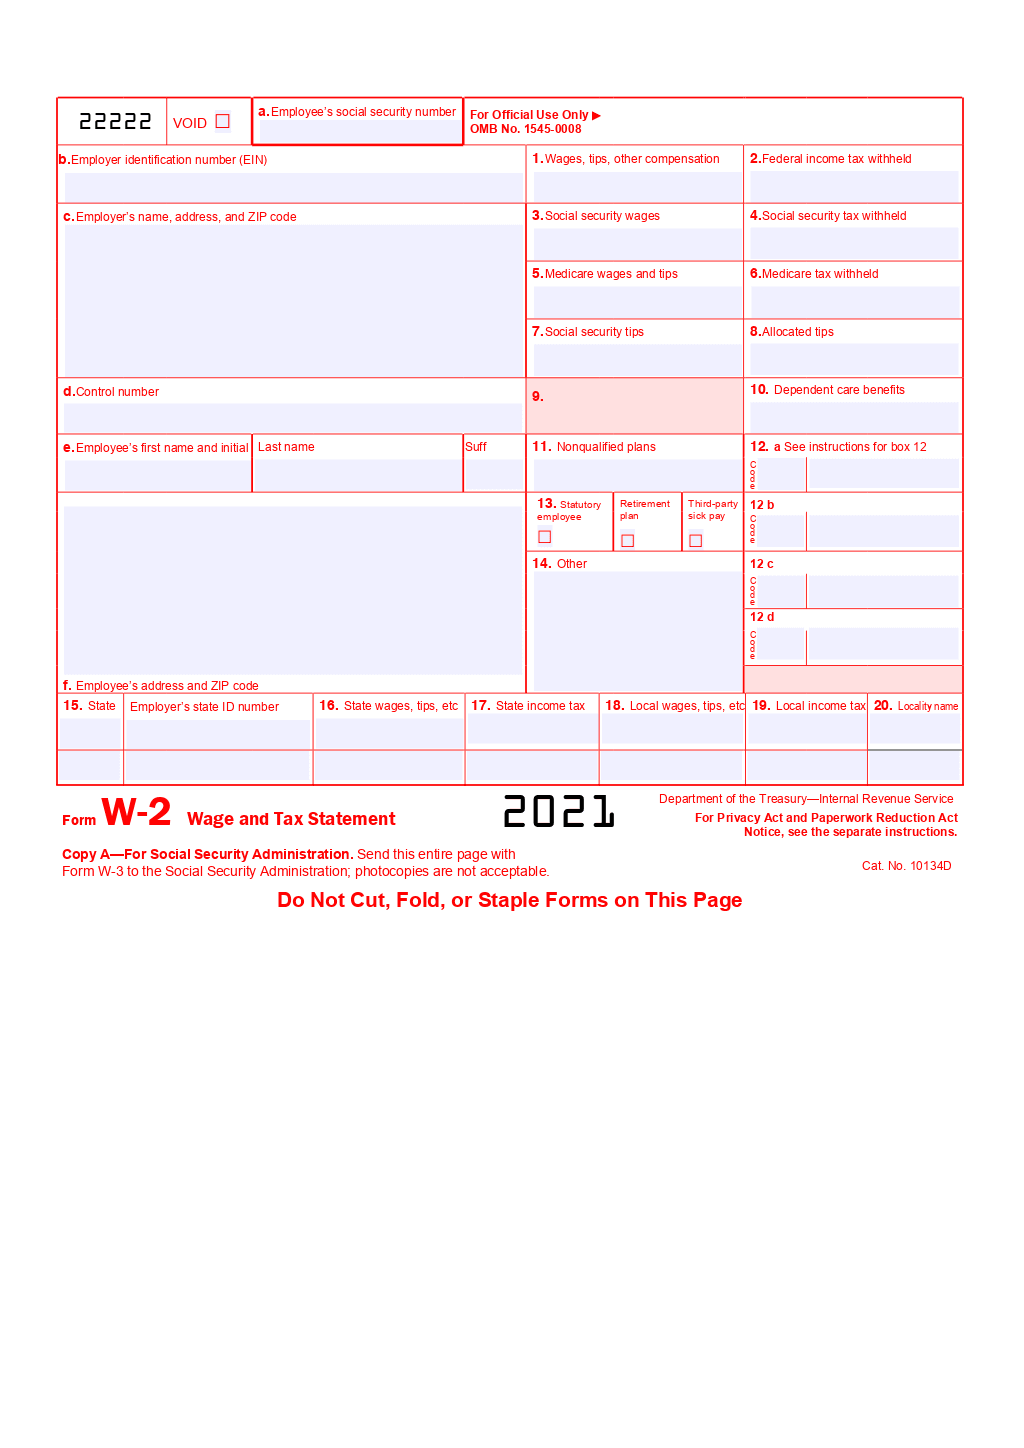 Form W-2 (Wage And Tax Statement) Template with Free Fillable W2 Form 2021